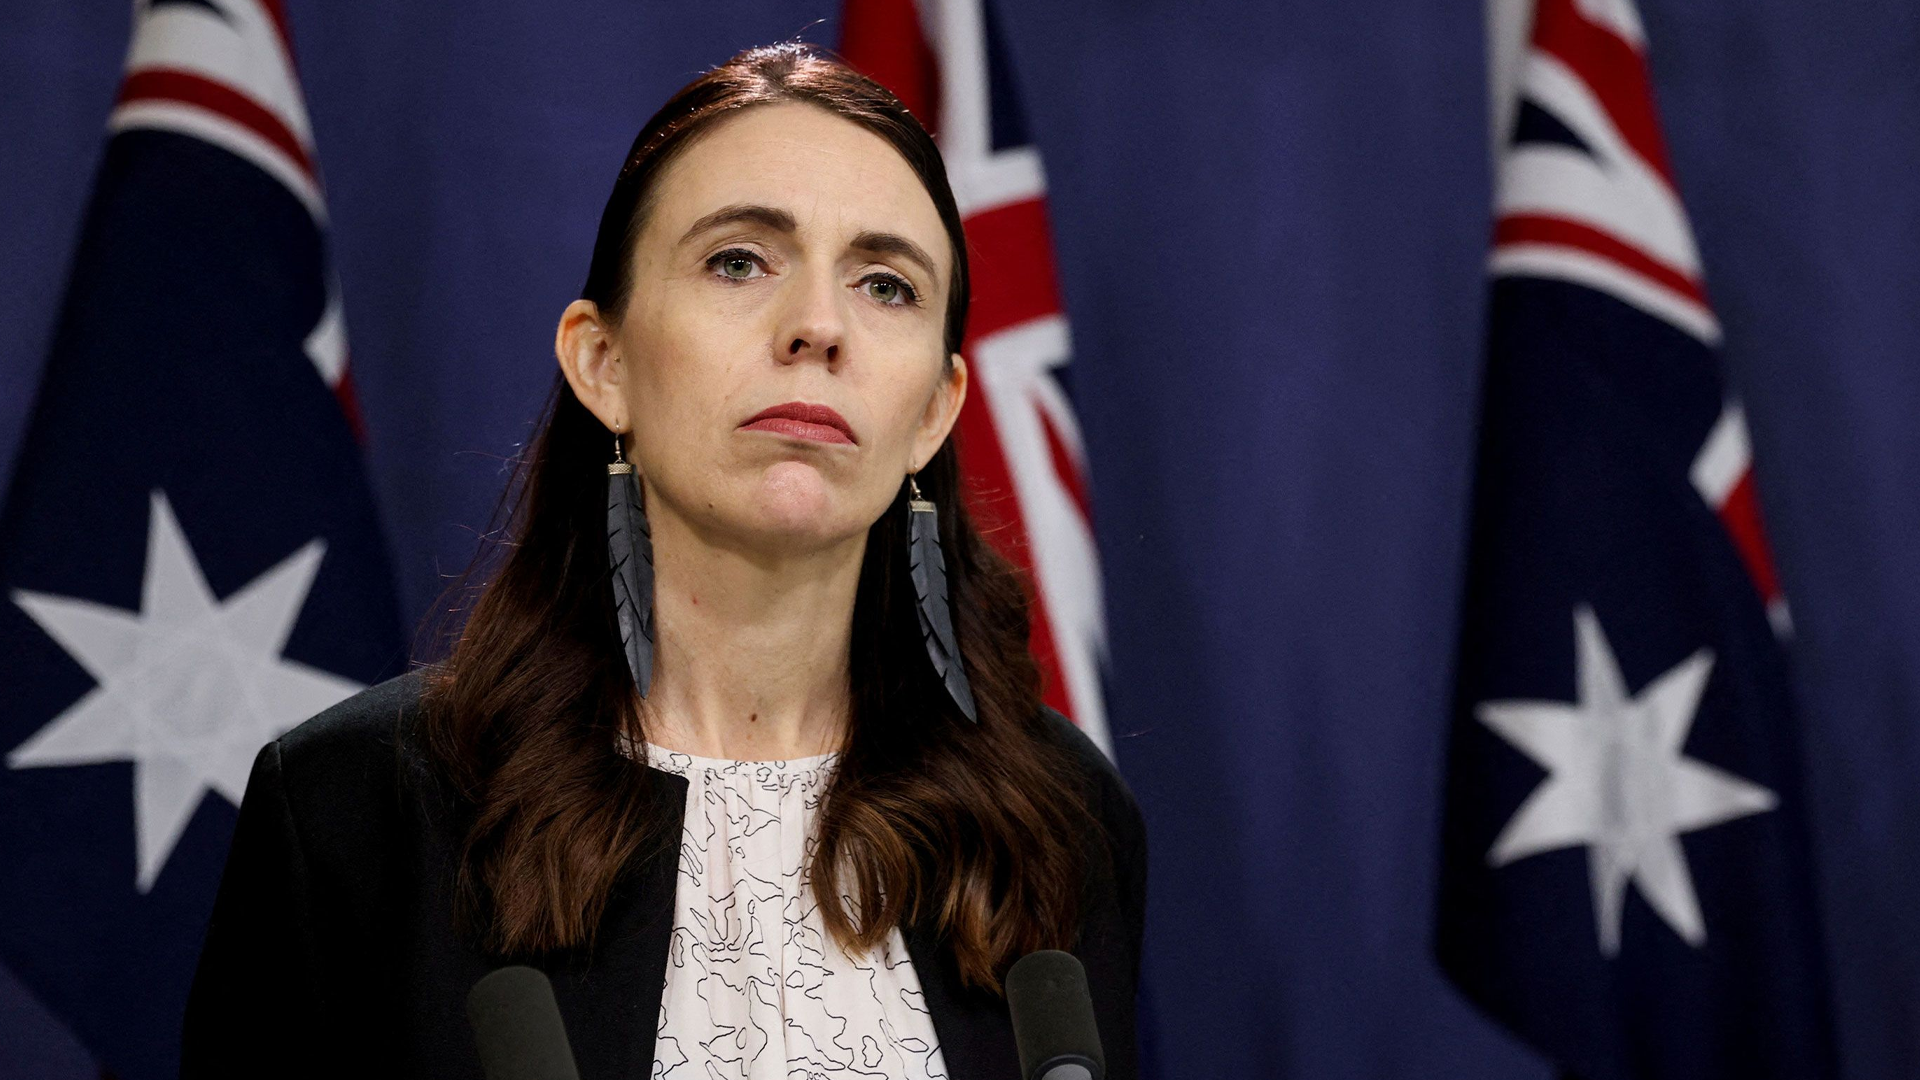 Jacinda Ardern resigns as Prime Minister of New Zealand